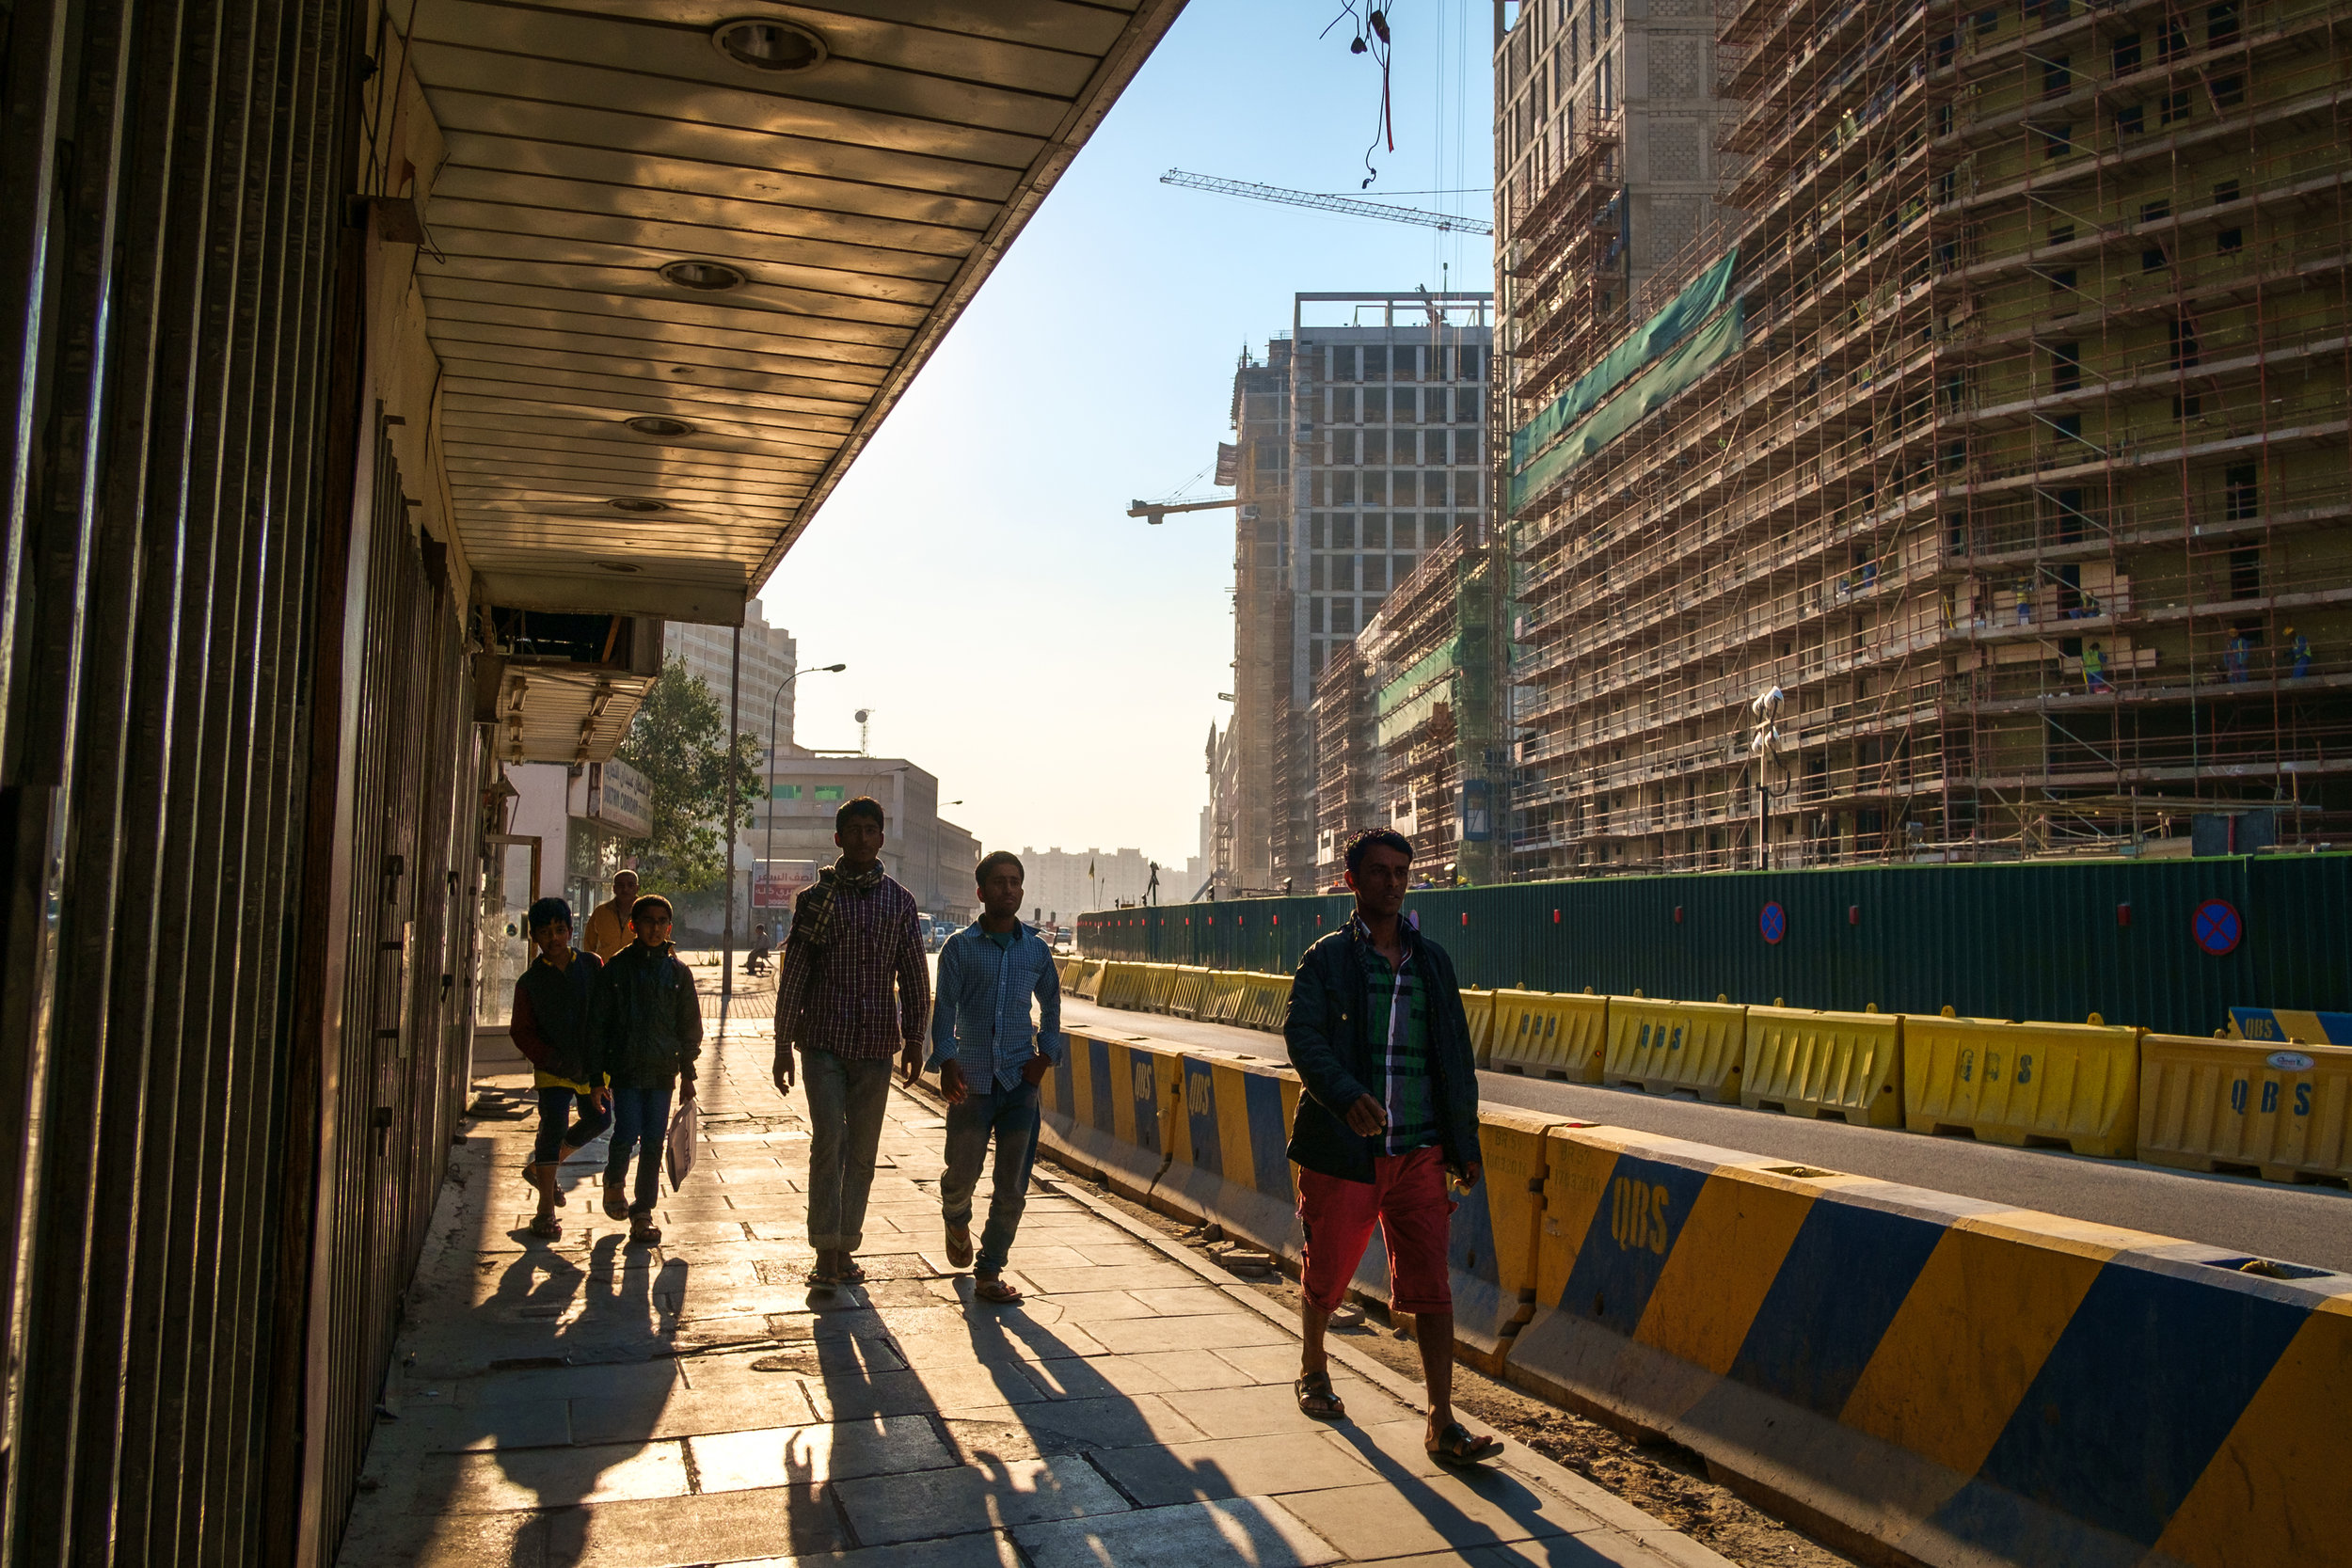  A street scene in the old Musheireb neighborhood of Doha with the new Msheireb development rising above it. Much of this old part of Doha has been torn down as Qatar races to revitalize and modernize in time to host the 2022 FIFA World Cup. 